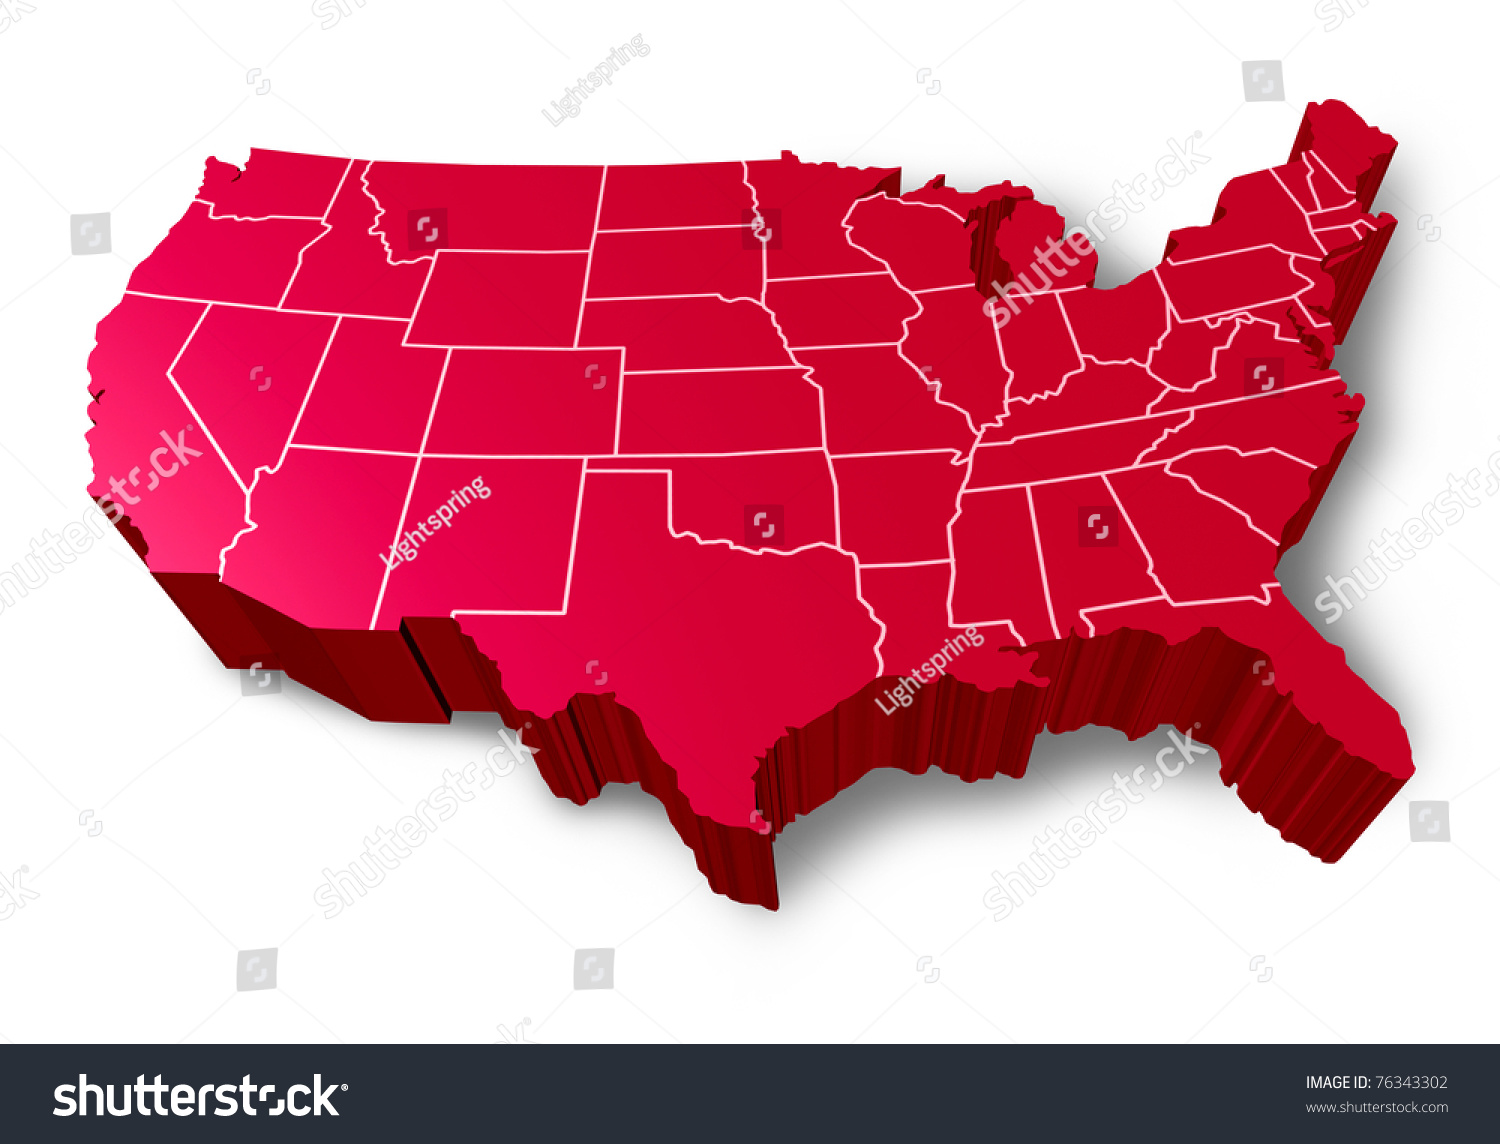 stock photo u s a d map symbol represented by a red dimensional united states 76343302